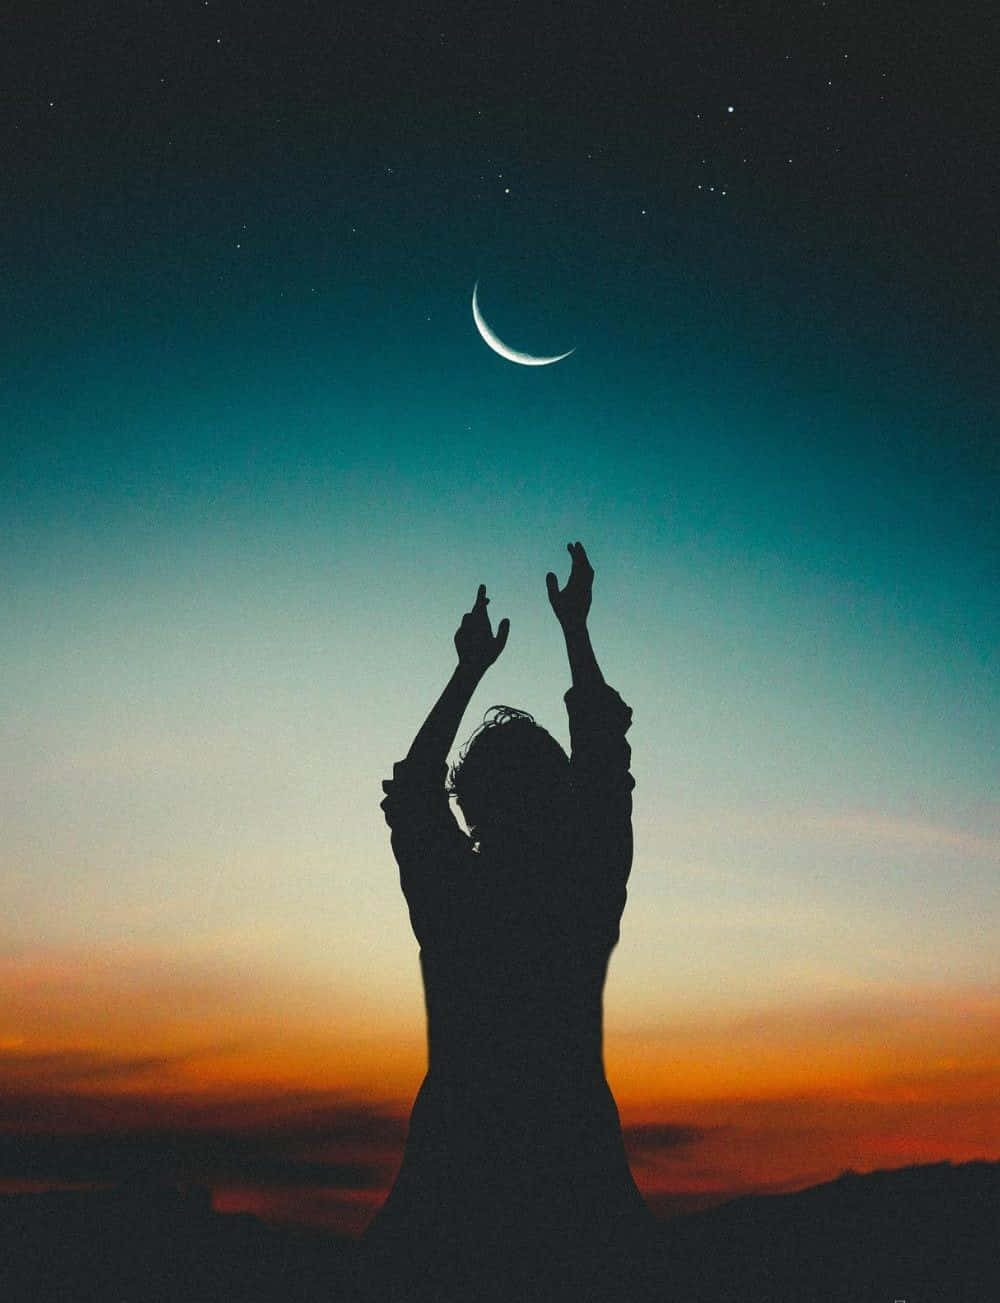 Single Woman Silhouette Reaching For The Moon Wallpaper